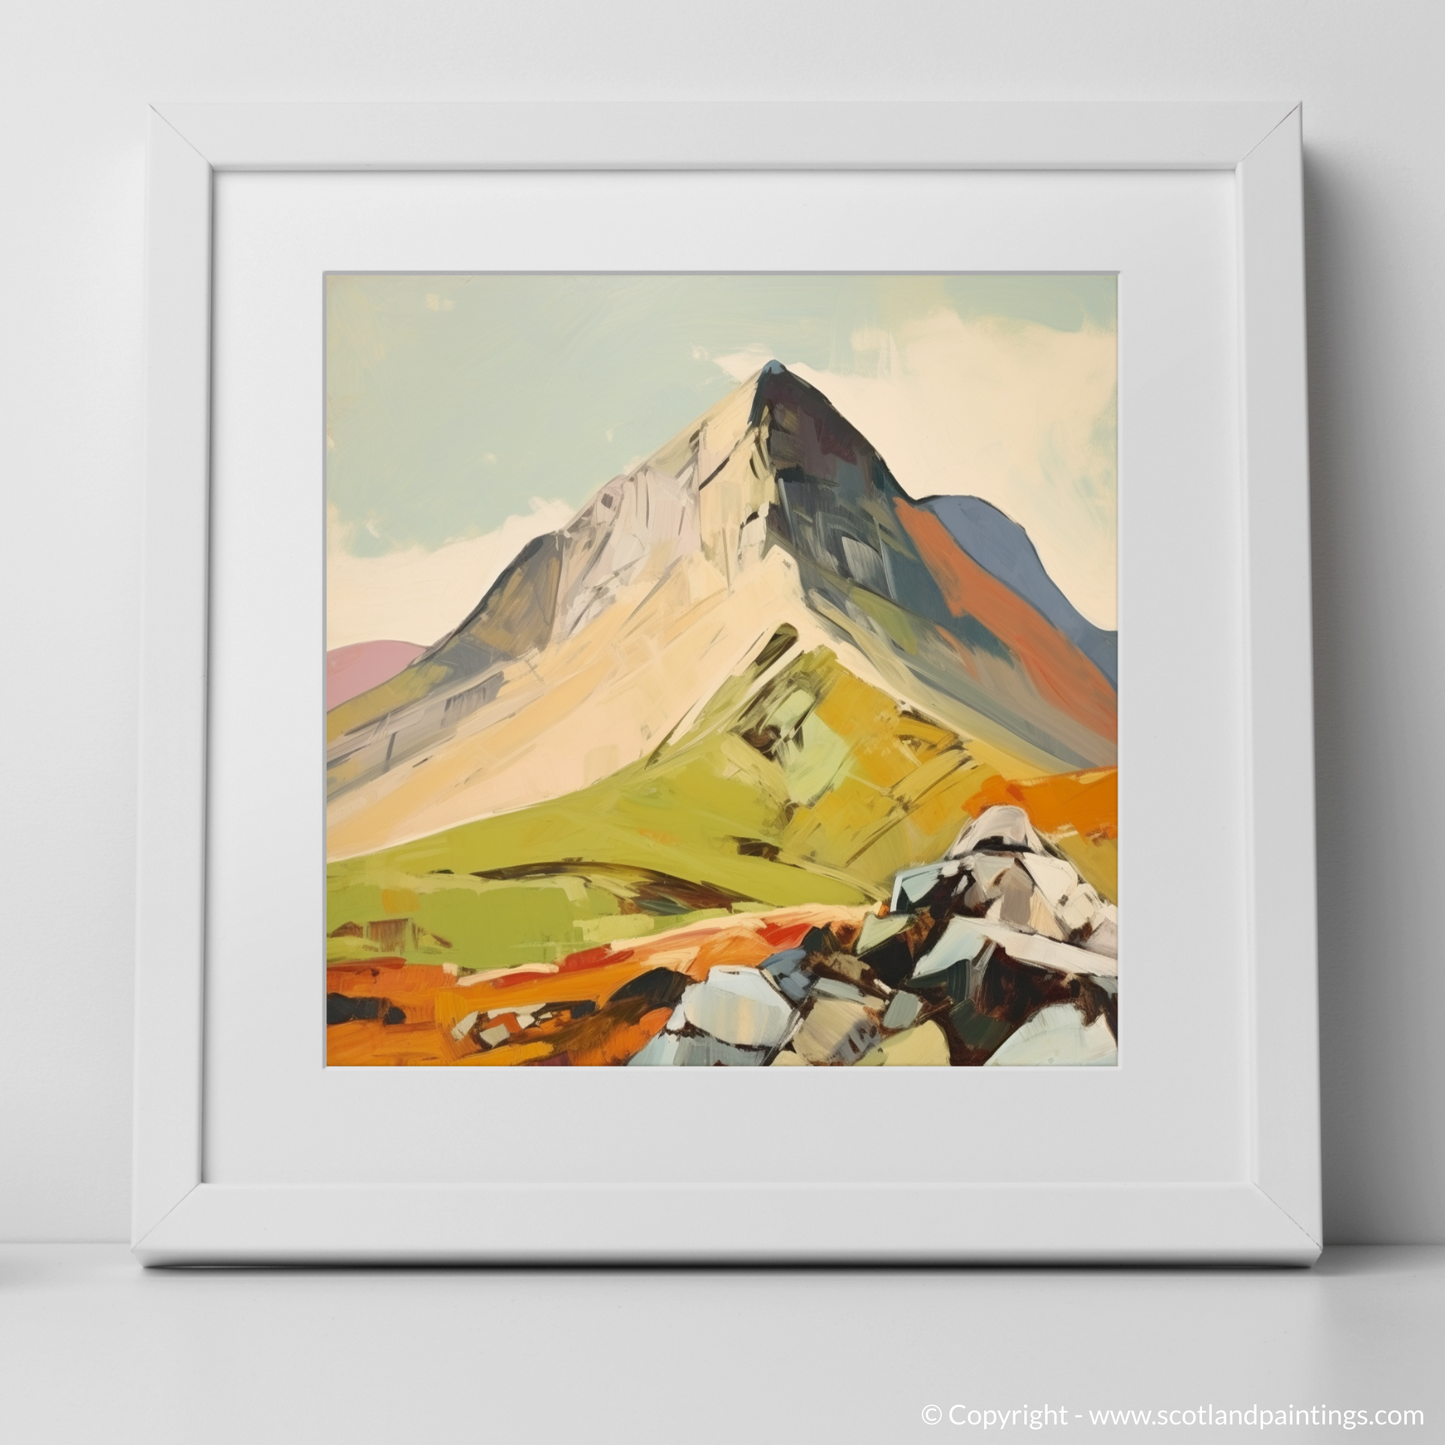 Art Print of A mountain in Scotland with a white frame